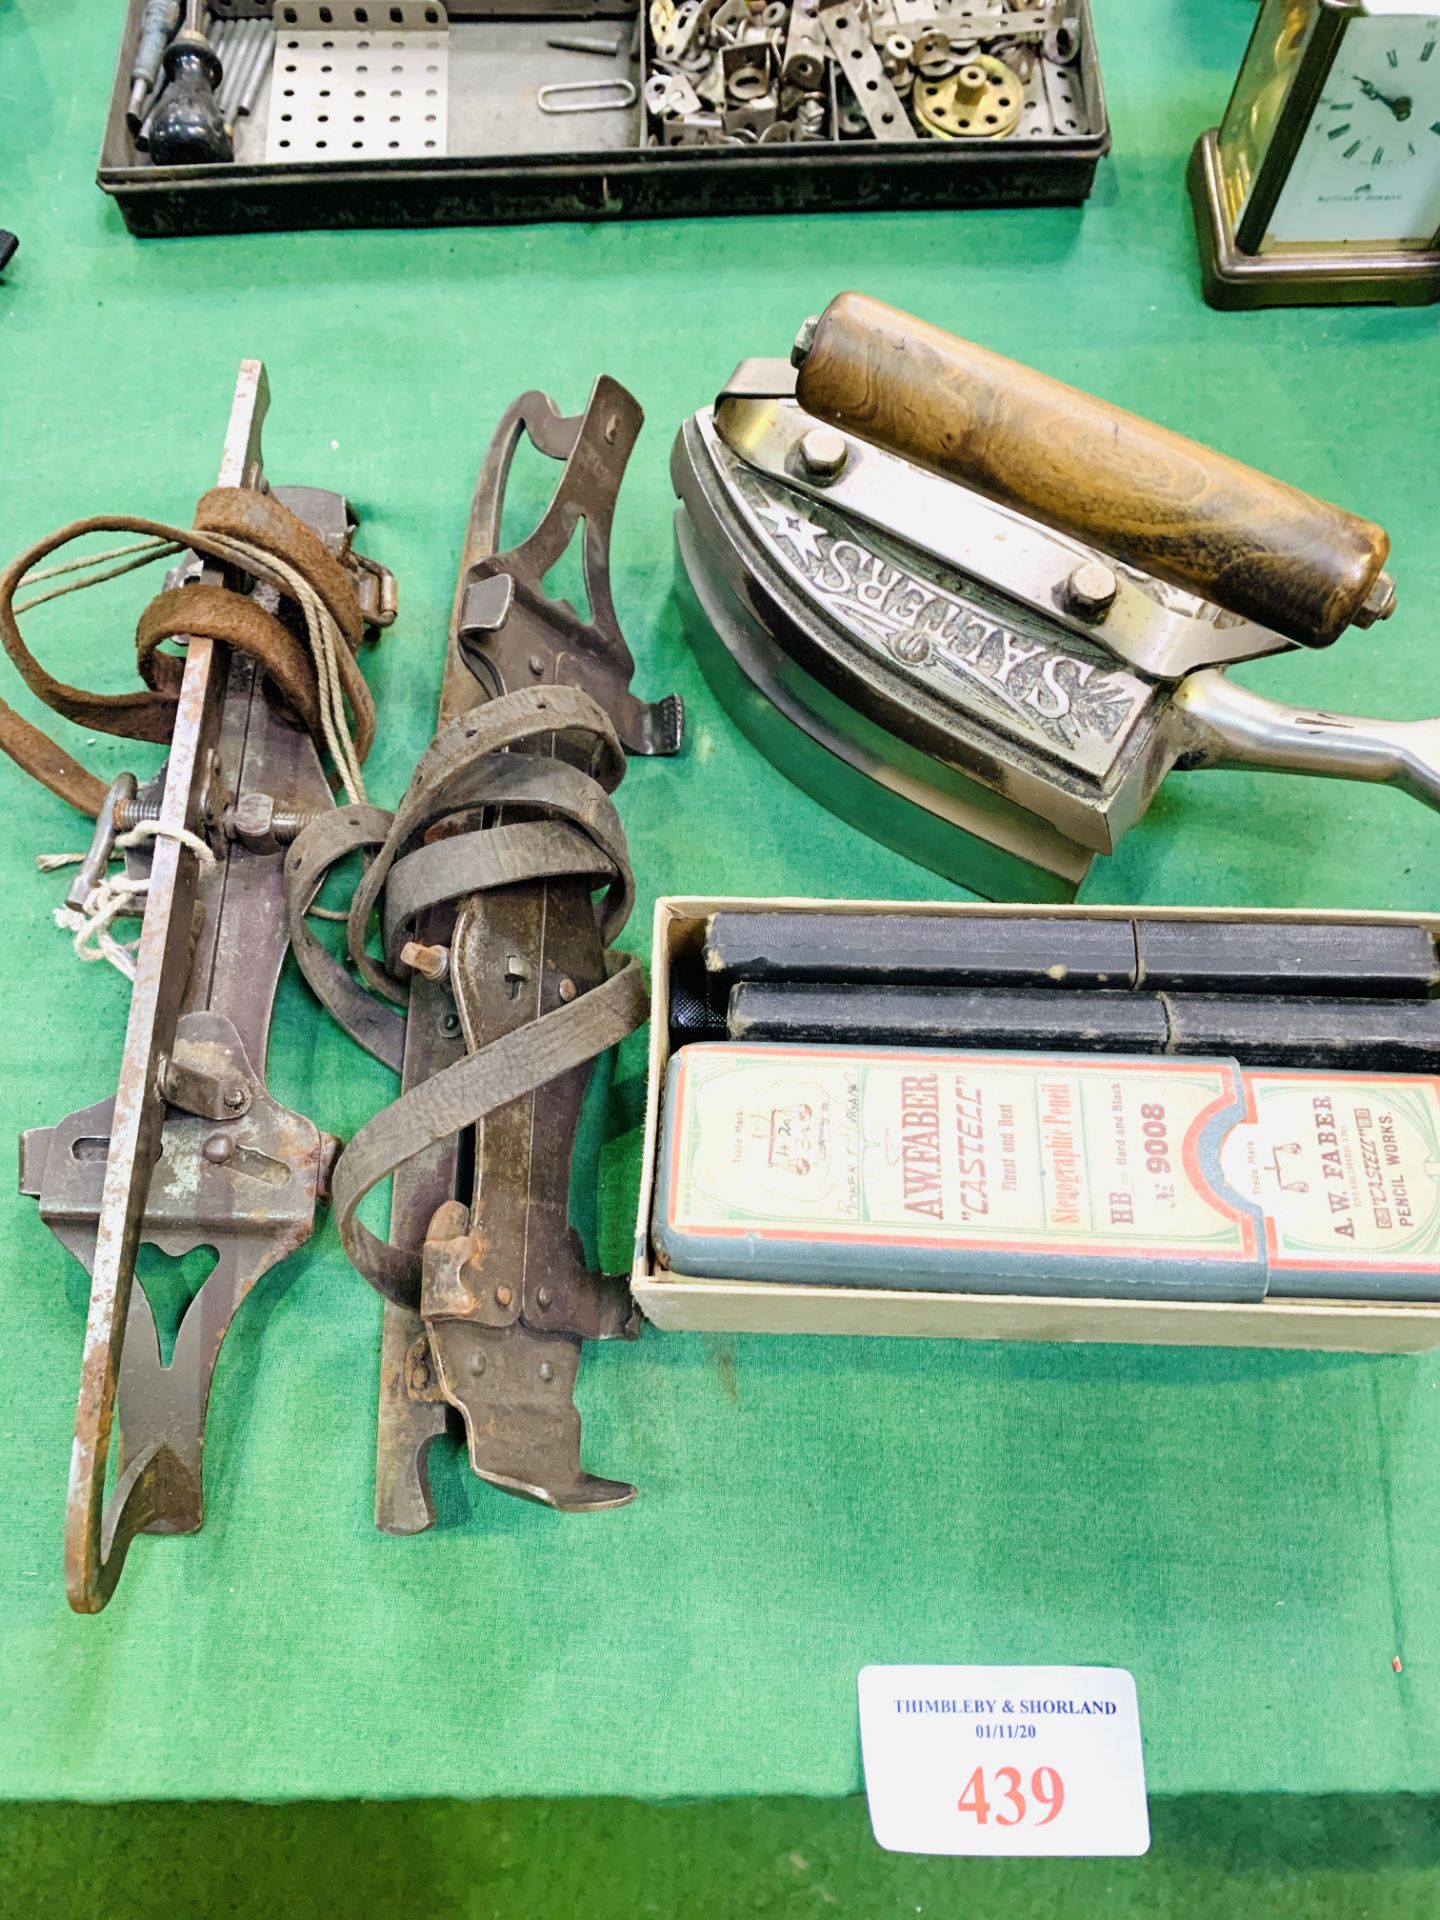 Salters gas iron; seven cut throat razors and a pair of strap on ice skates.